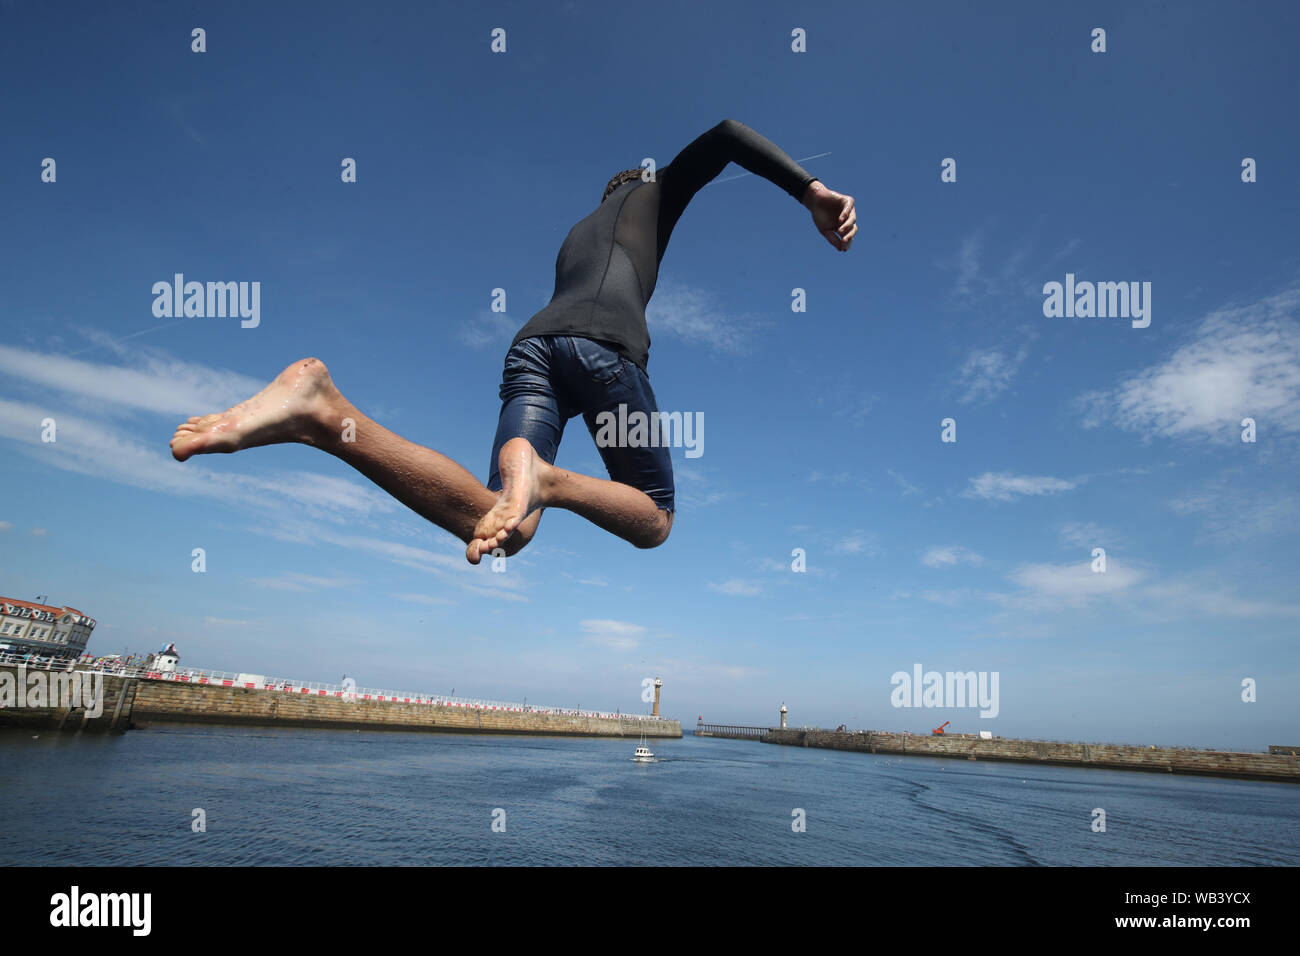 People jumping into the sea at Whitby Abbey in Yorkshire, as a bank holiday heatwave will see most of the country sizzling in sunshine with possible record temperatures, the Met Office has said. Stock Photo